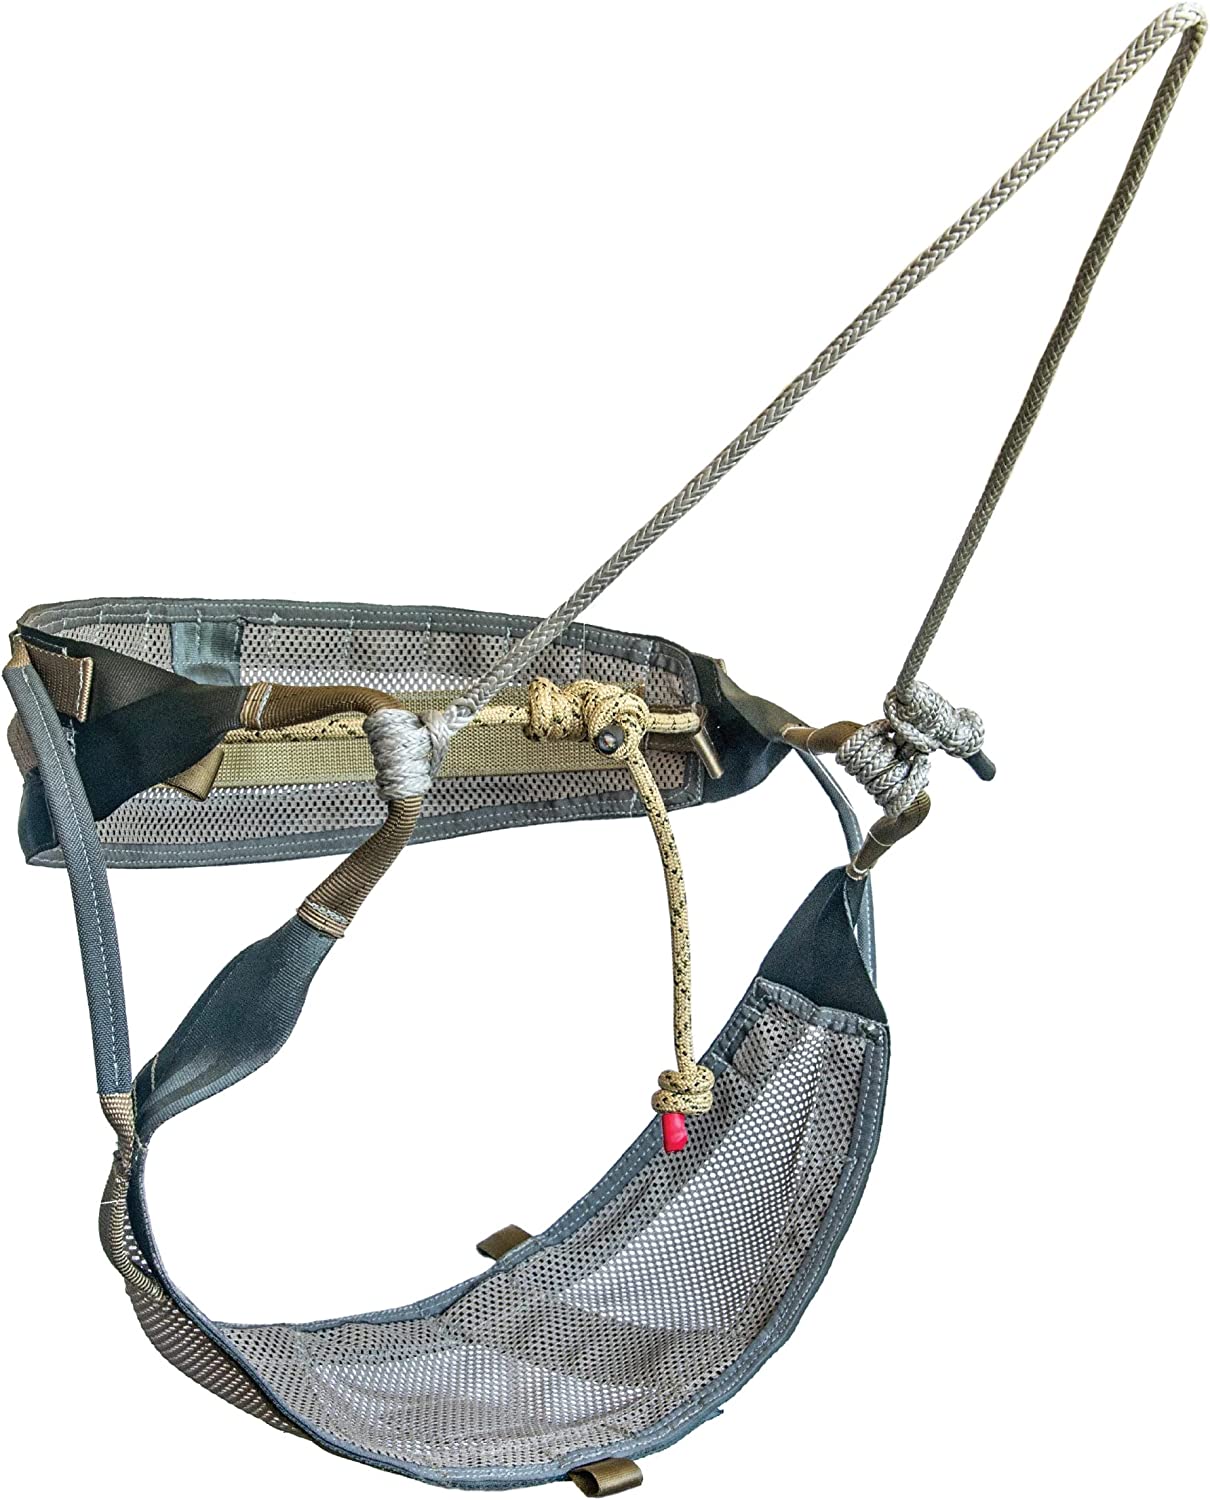 Latitude Outdoors Method 2 ultra-light compact hunting saddle extended view